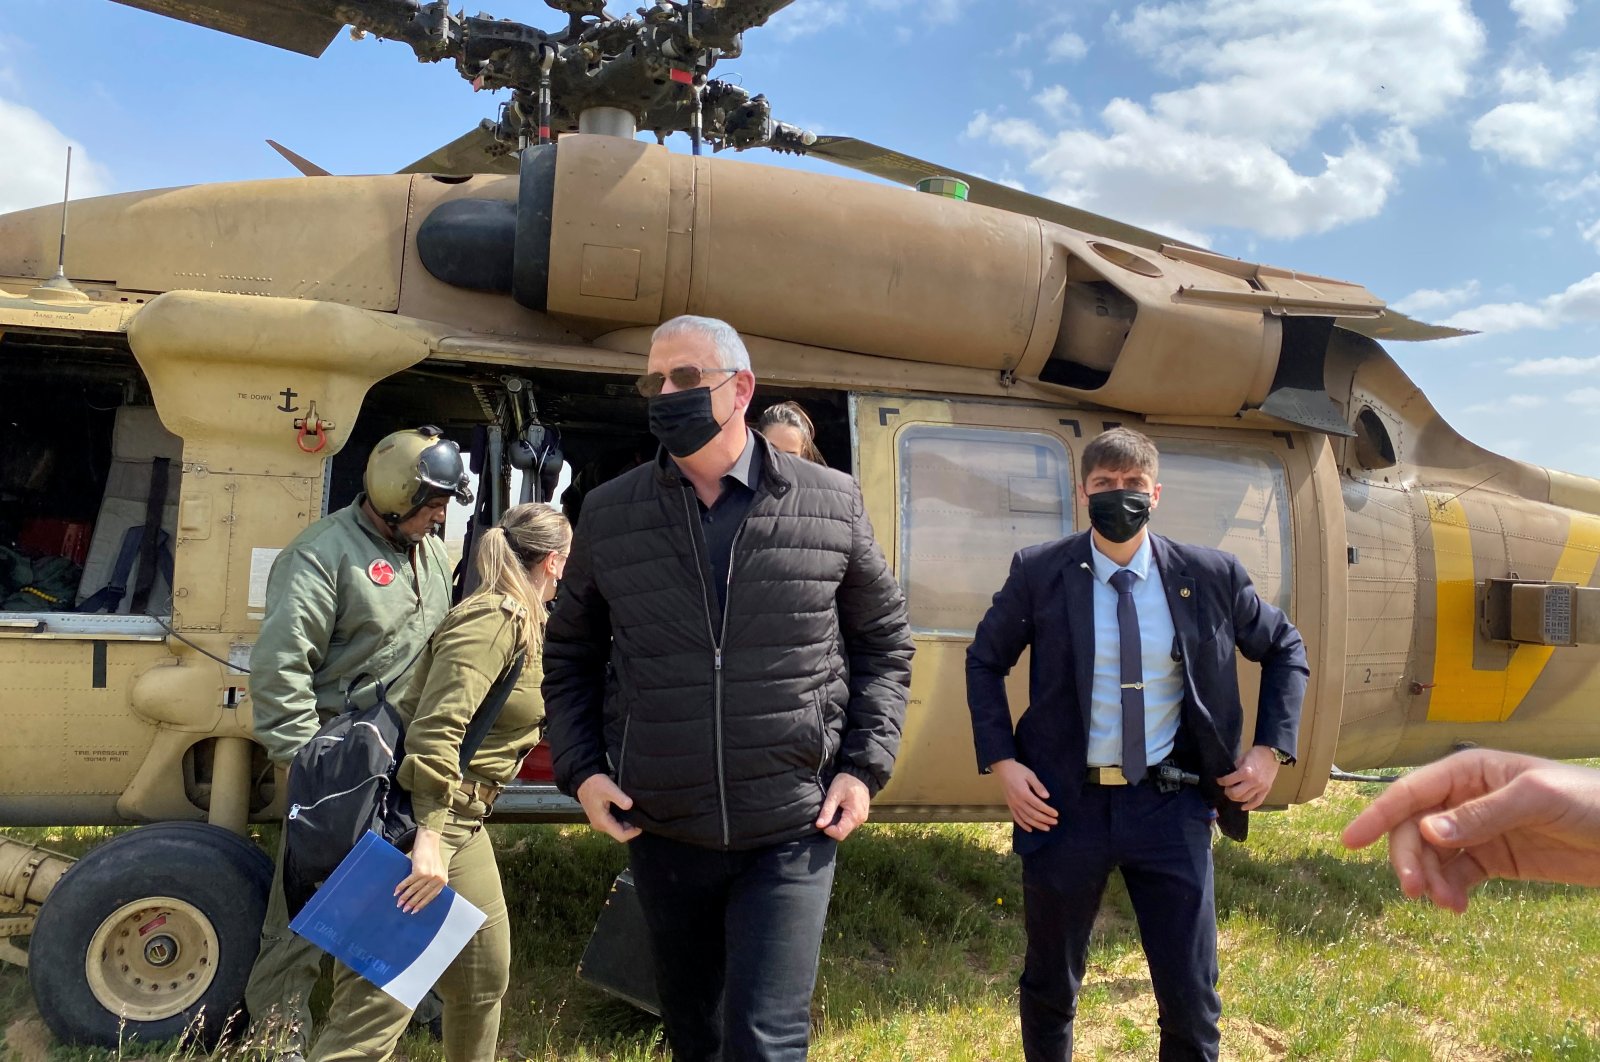 Israeli Defense Minister Benny Gantz adjusts his jacket after stepping off a helicopter during a tour of the Gaza border area, in southern Israel, March 2, 2021. (Reuters Photo)